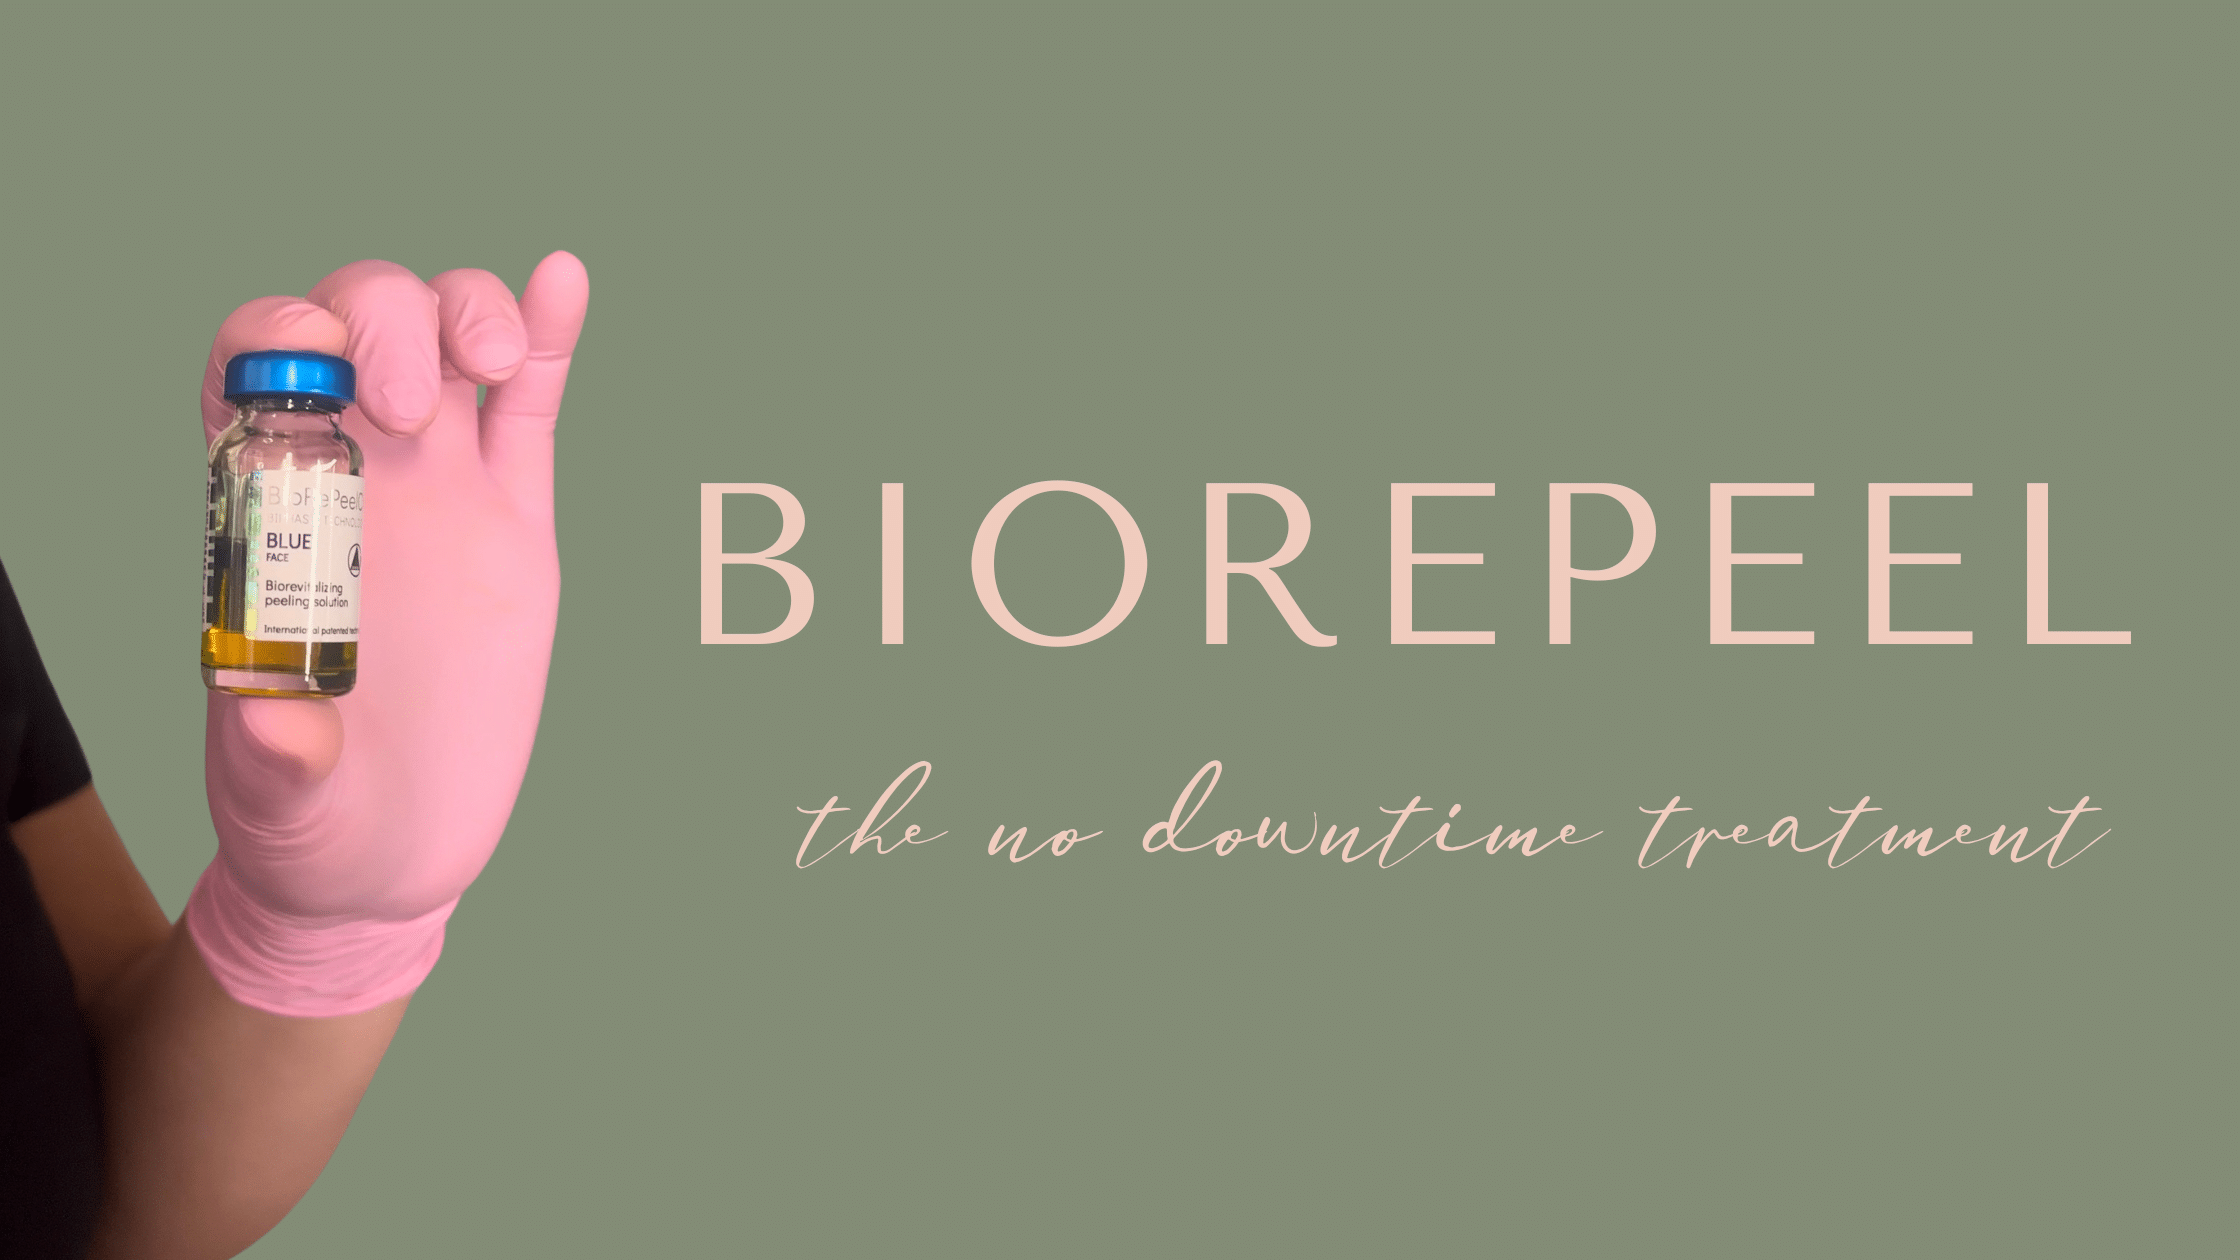 What’s the craze about BioRepeel?